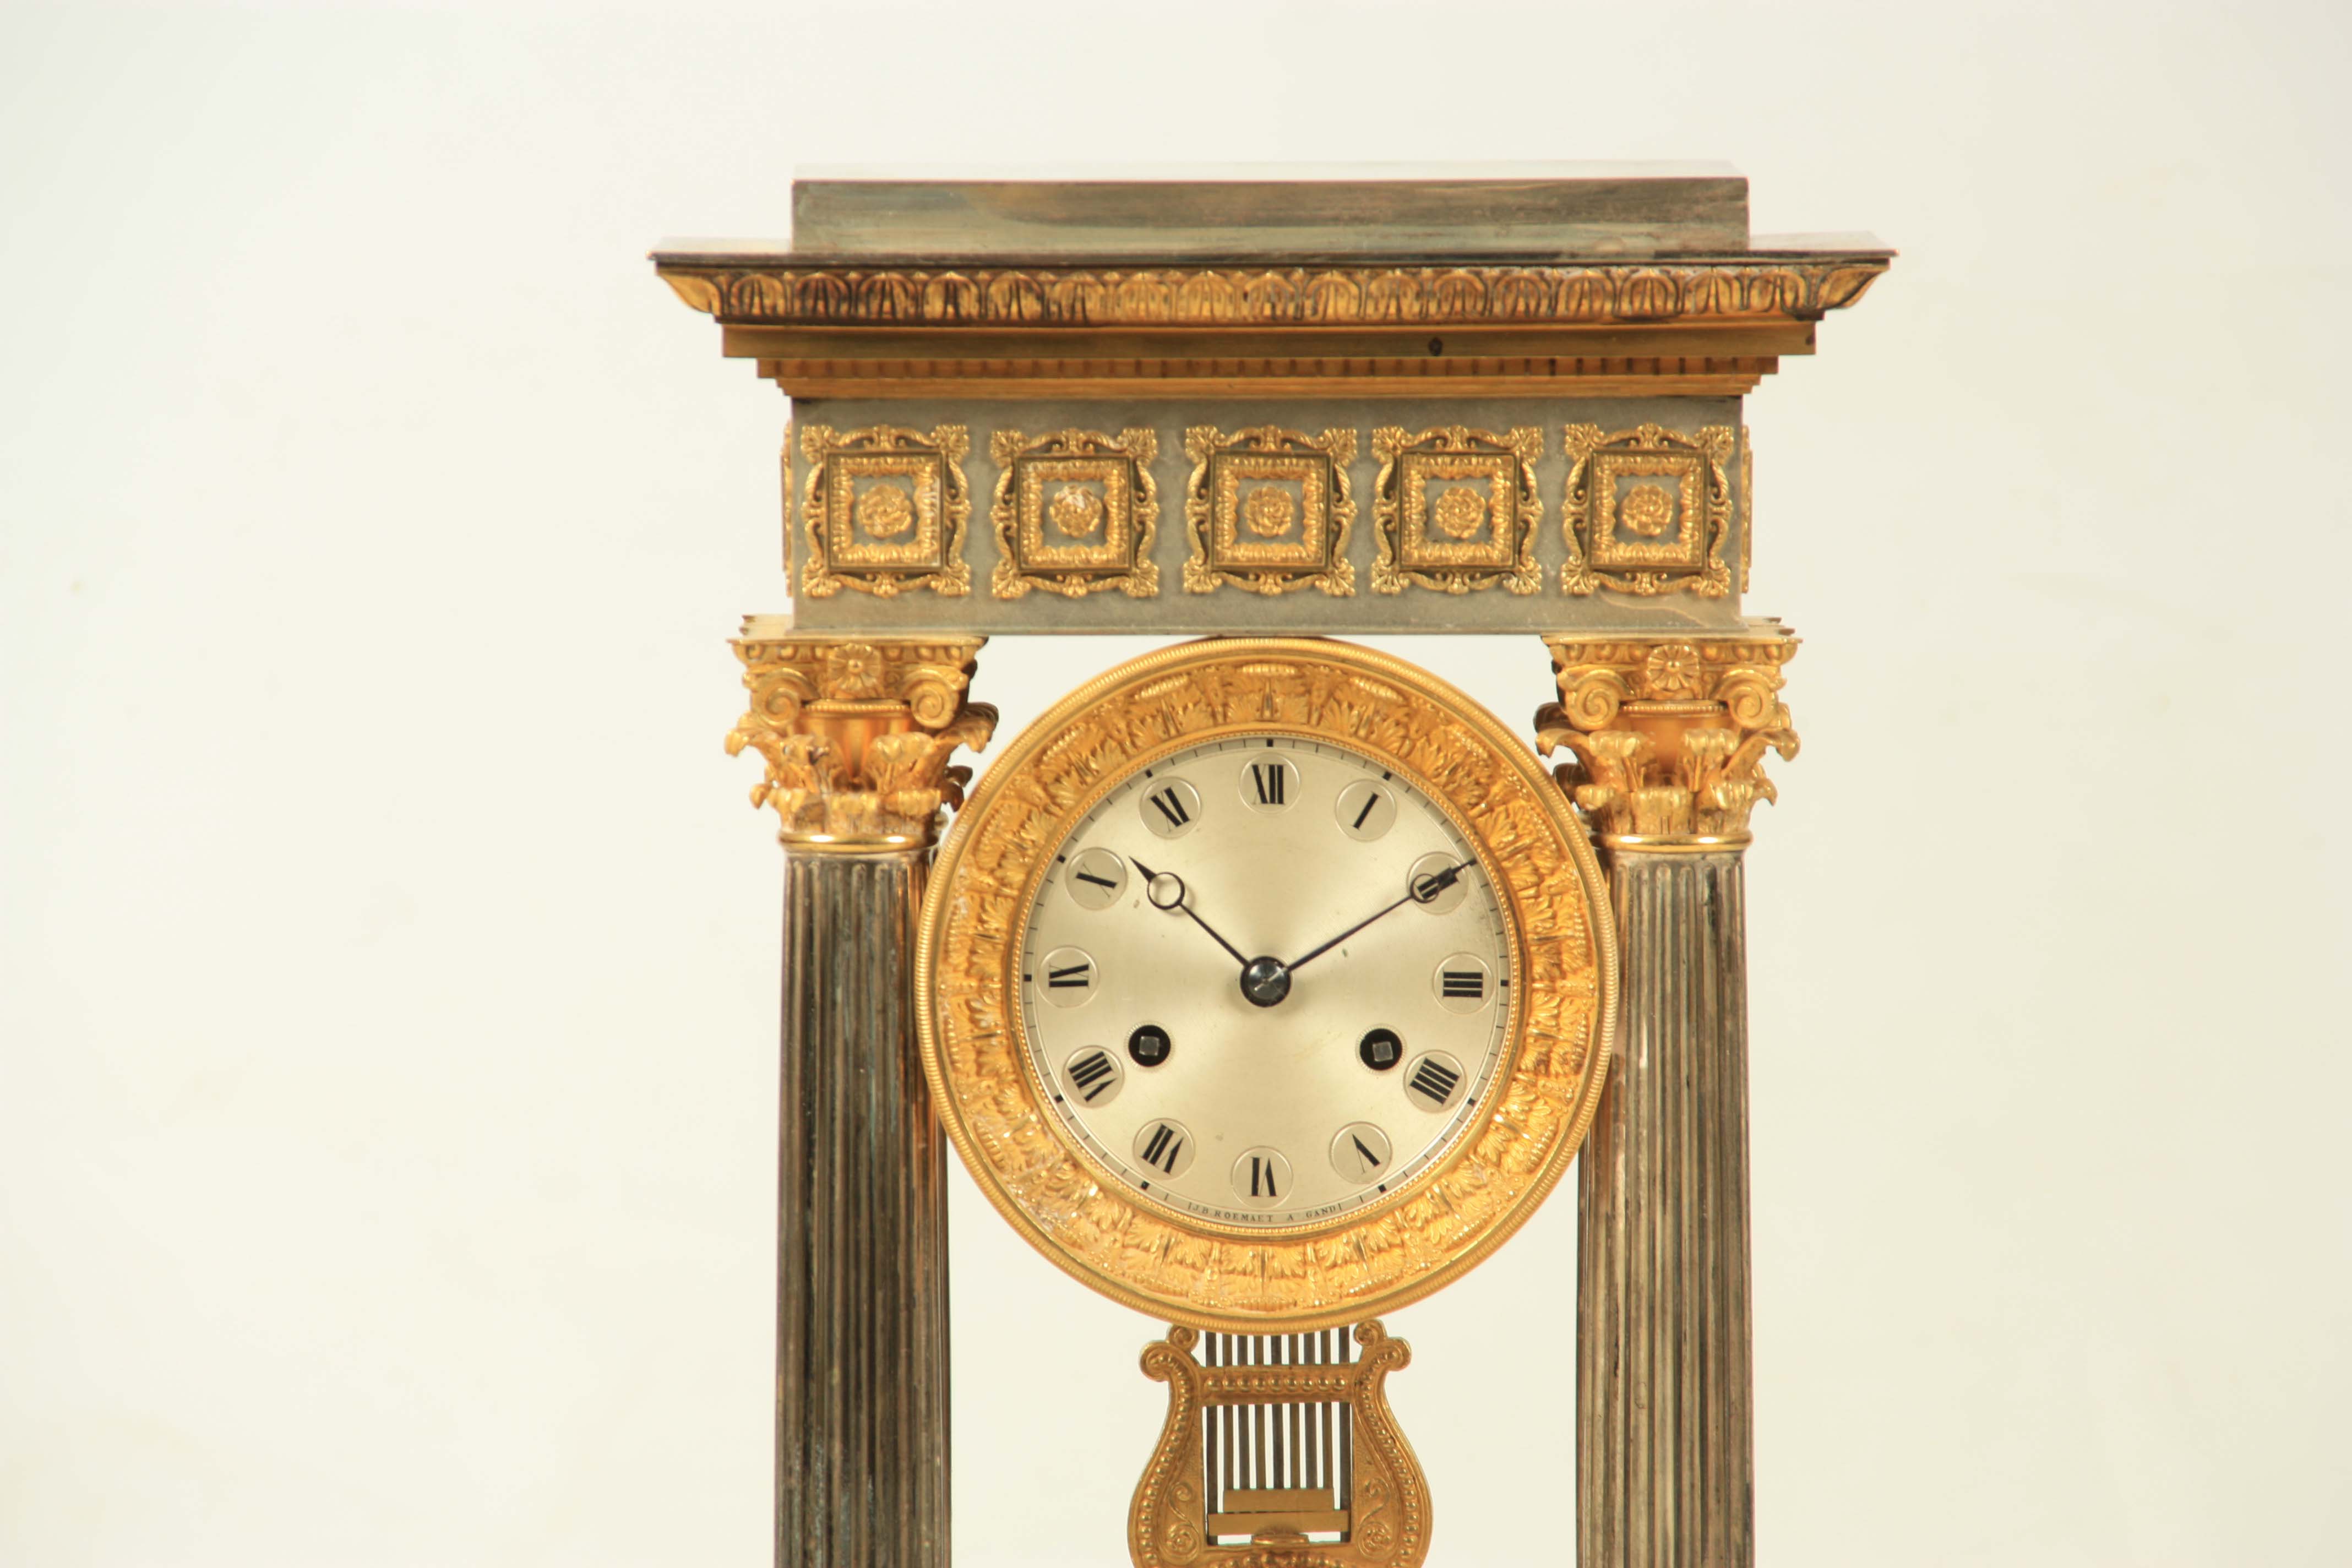 J.B. ROEMAET, A GRAND. A MID 19TH CENTURY FRENCH ORMOLU AND SILVERED PORTICO MANTEL CLOCK the case - Image 3 of 6